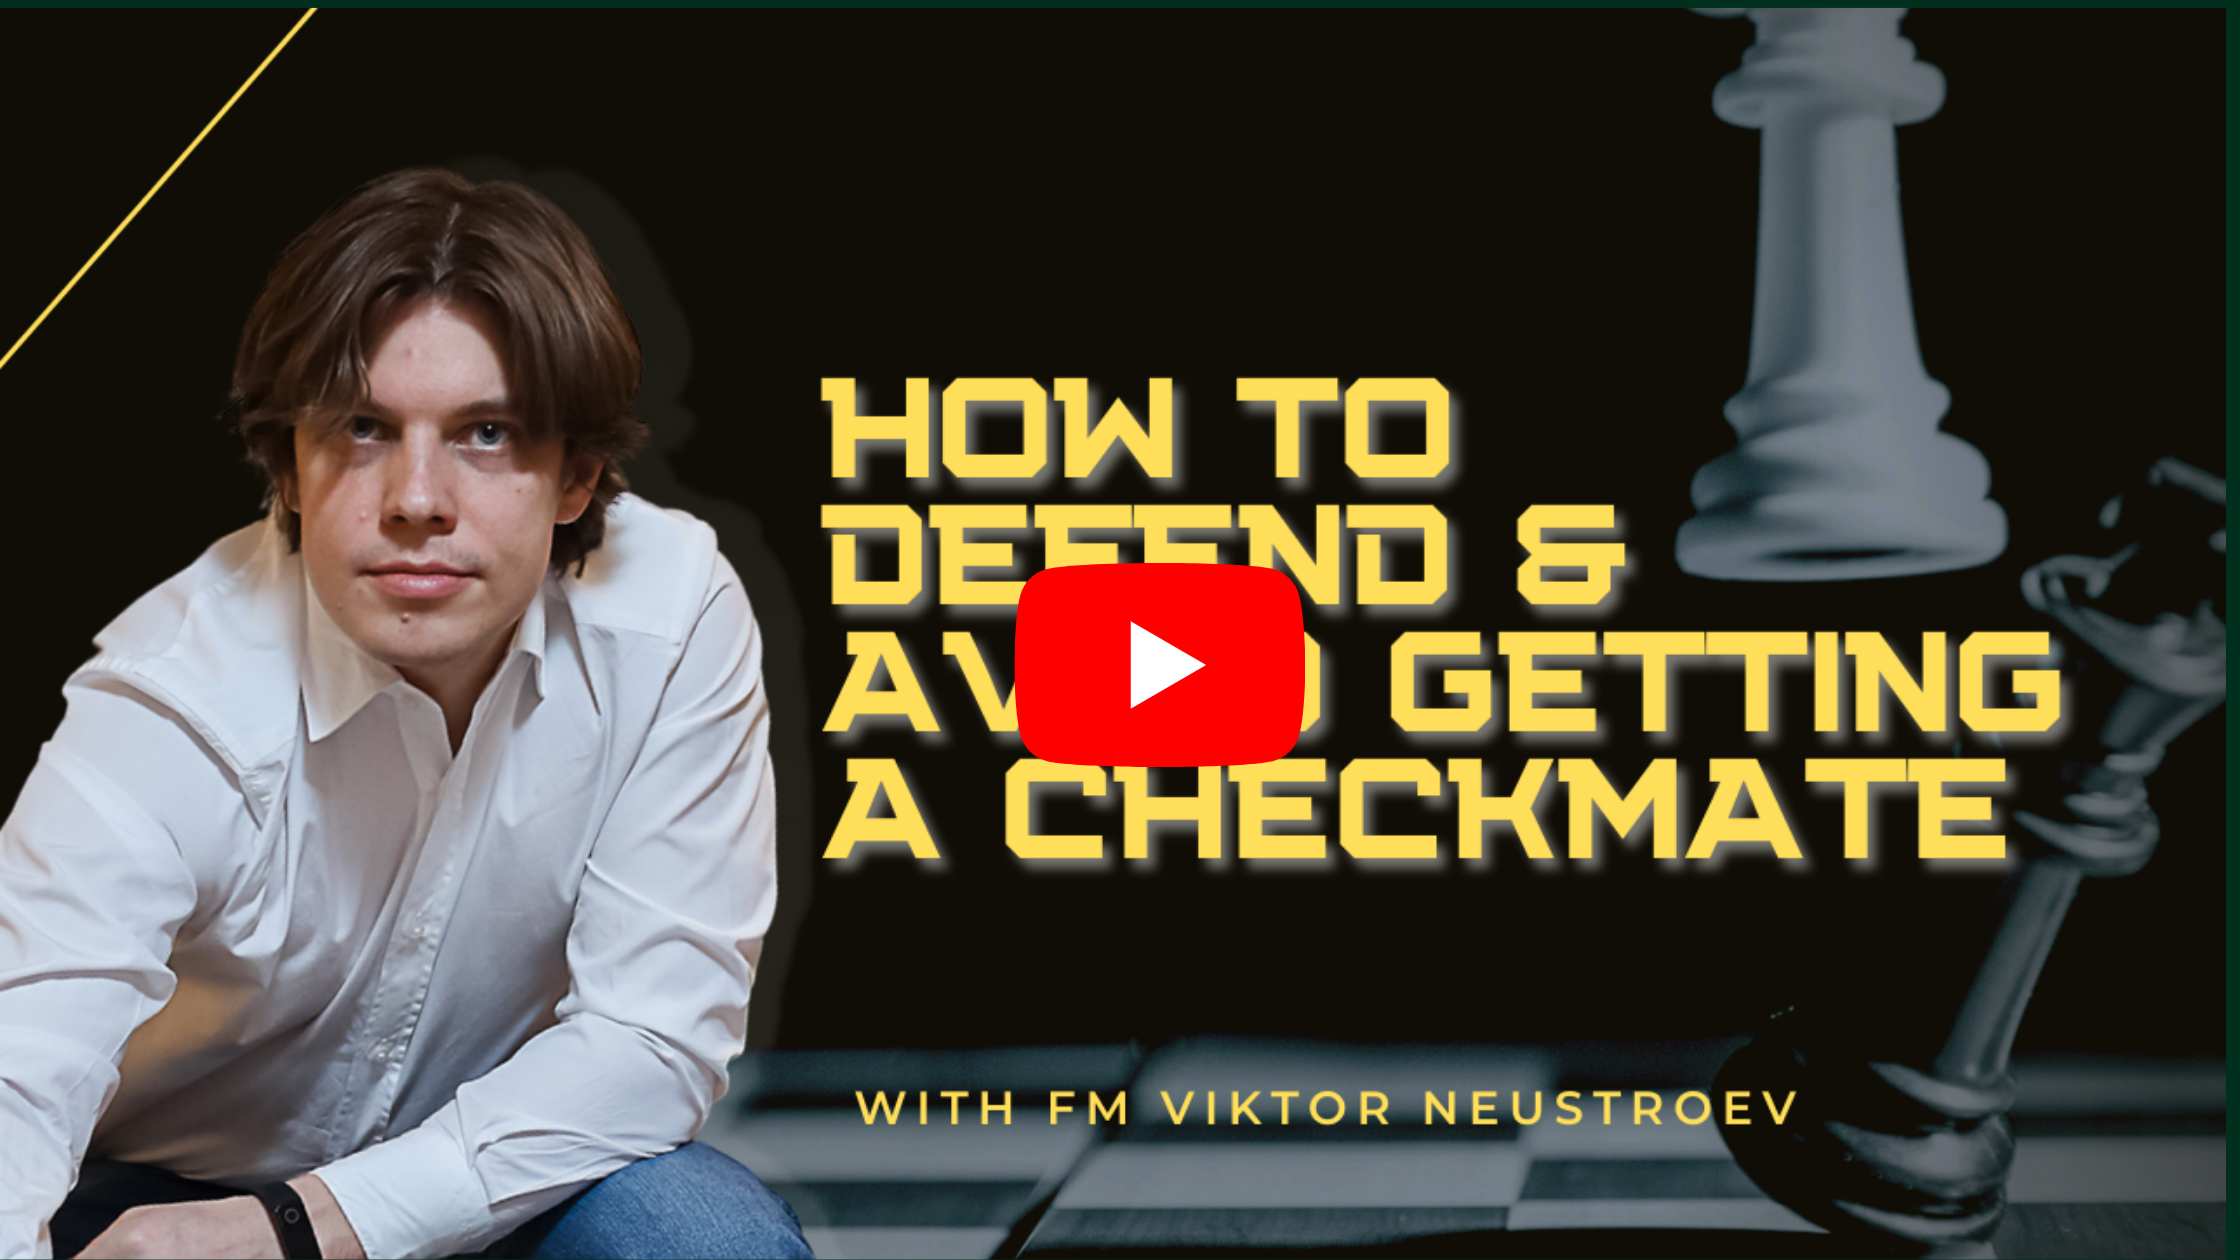 Watch my new video How to Defend and Avoid Getting a Checkmate